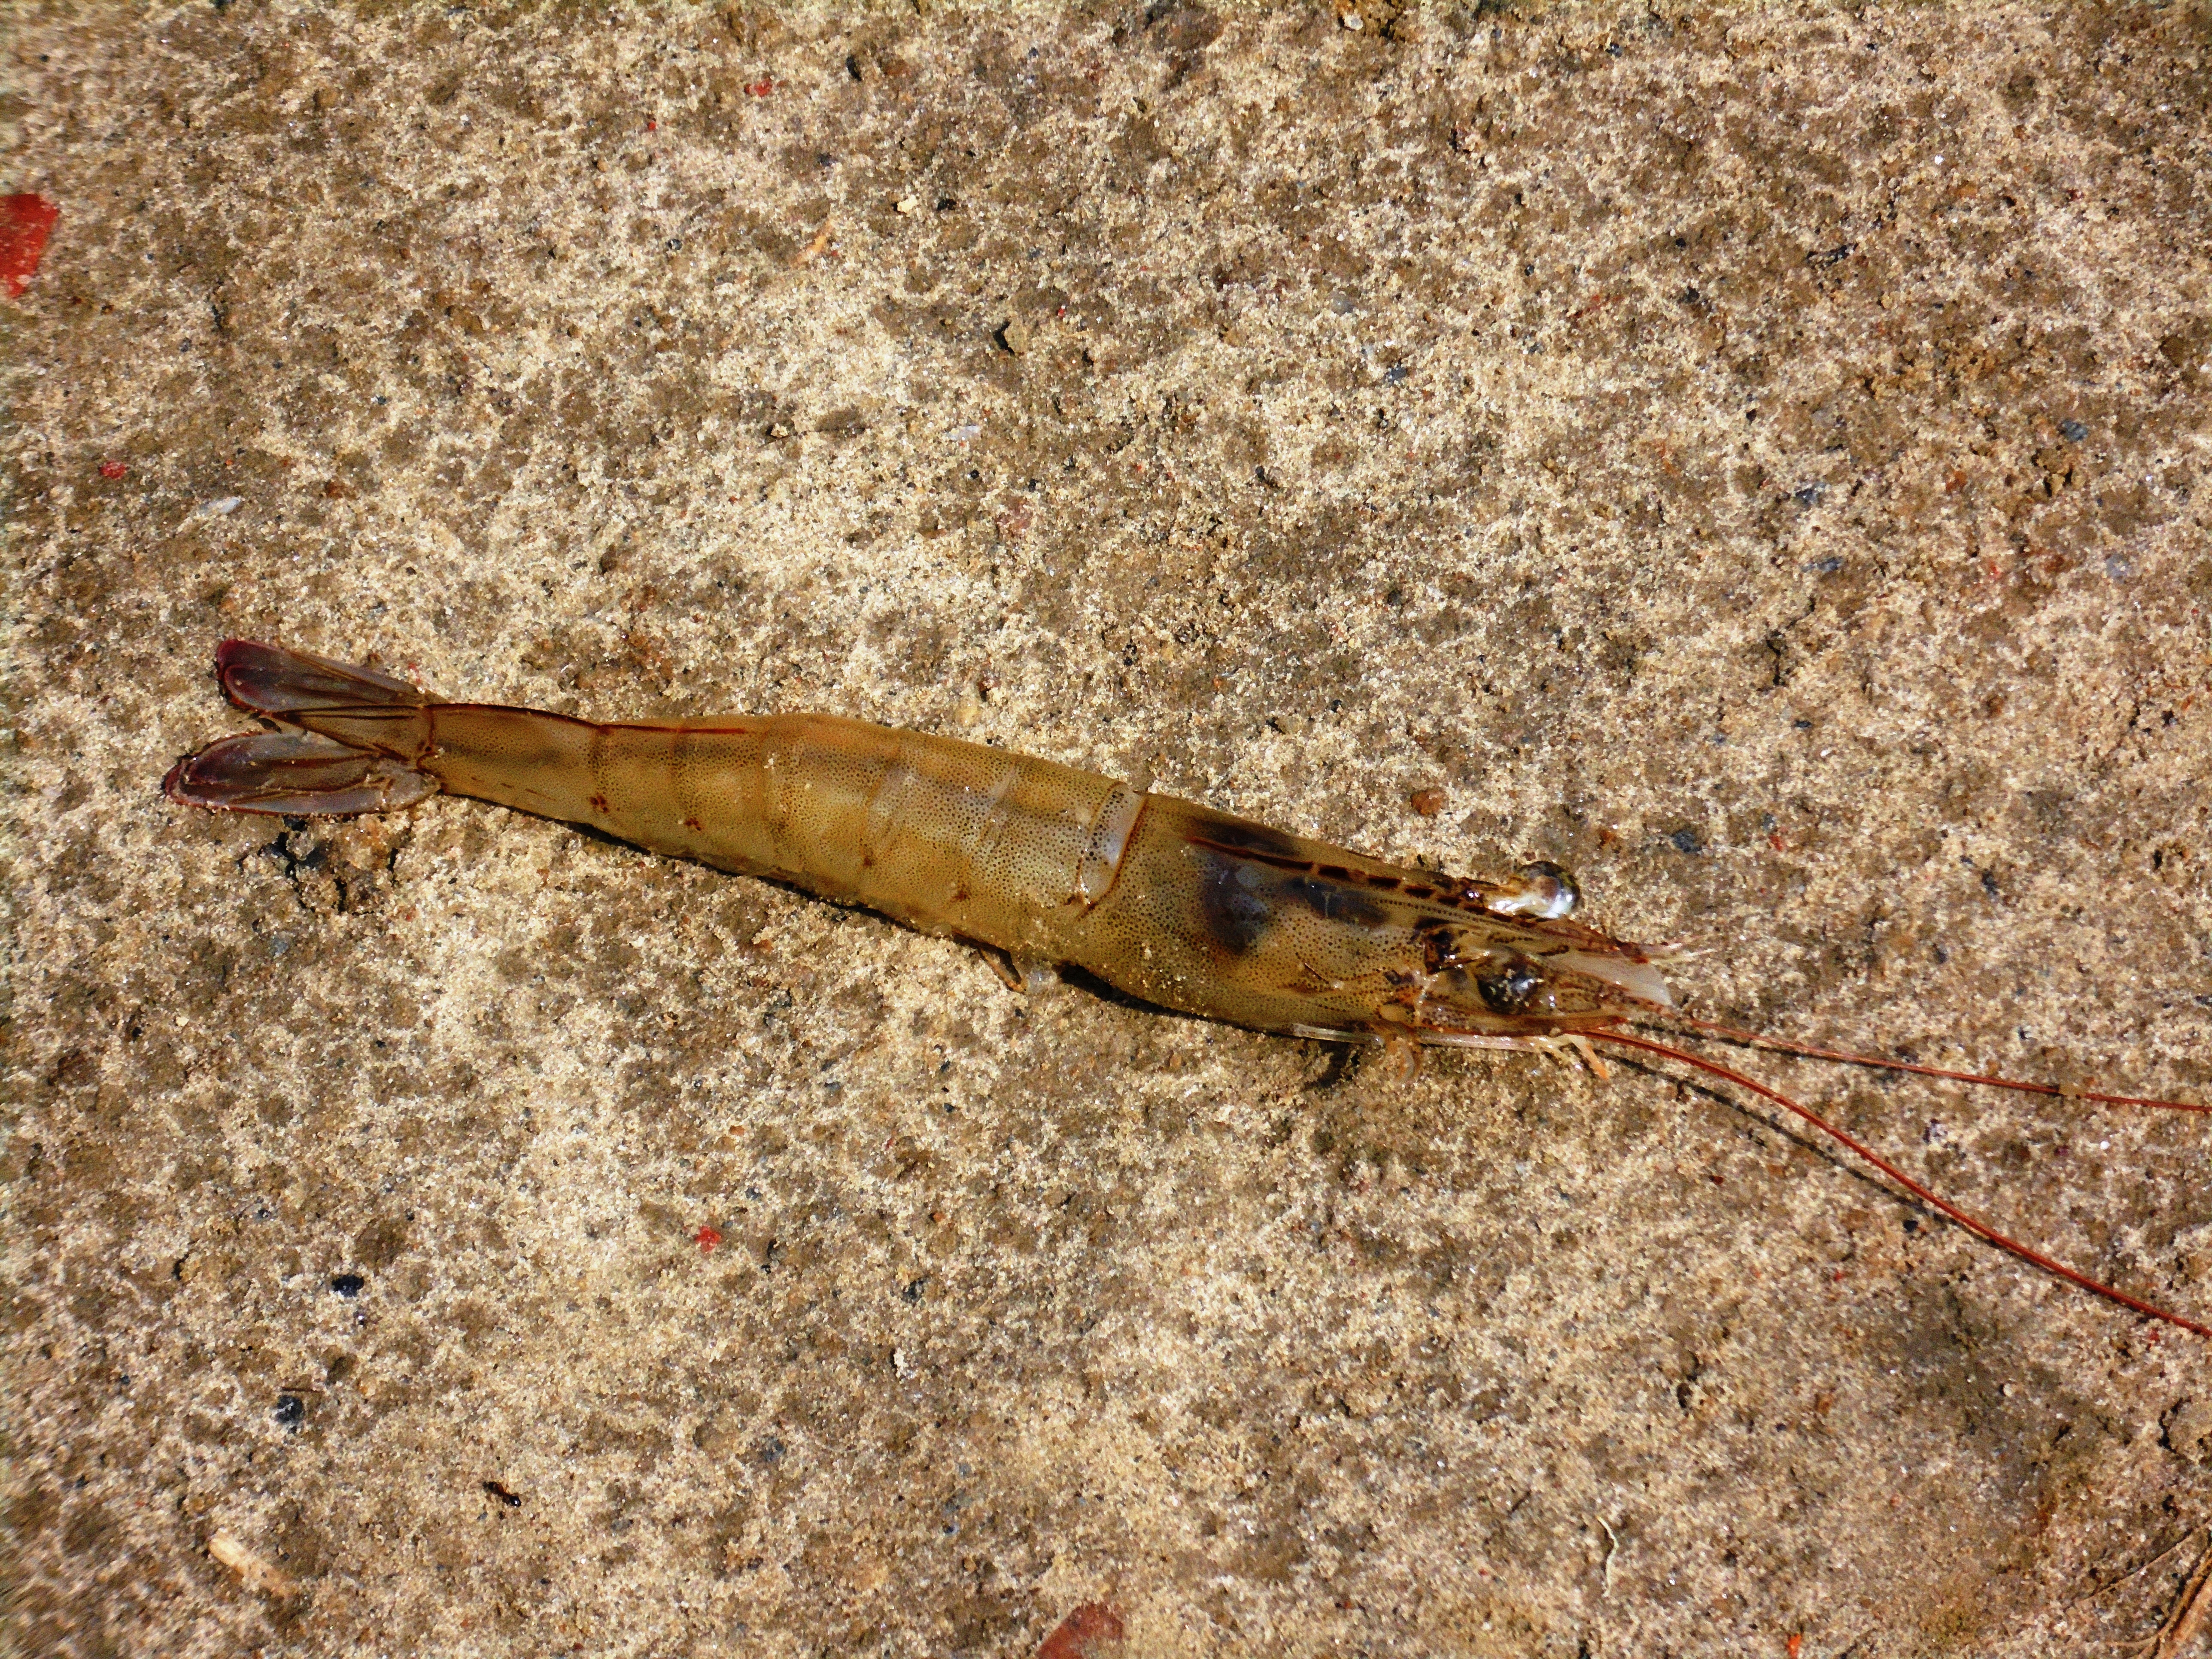 Vannamei shrimp that CIFE is introducing on a large scale